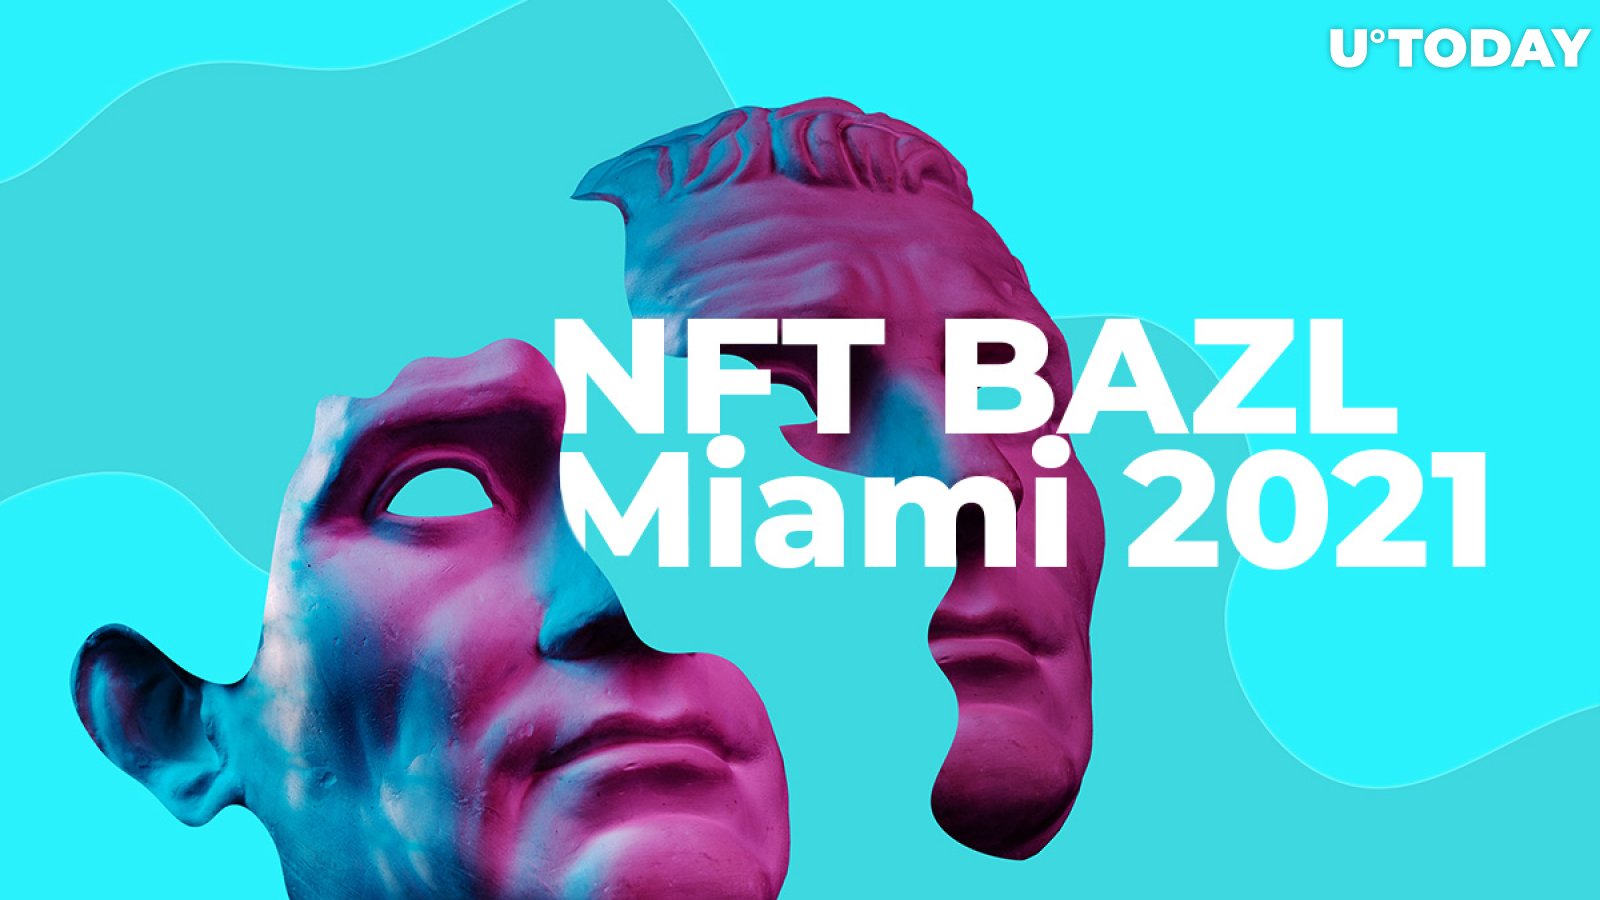 Miami's NFT BAZL Event Could Stimulate NFT Industry Boosting